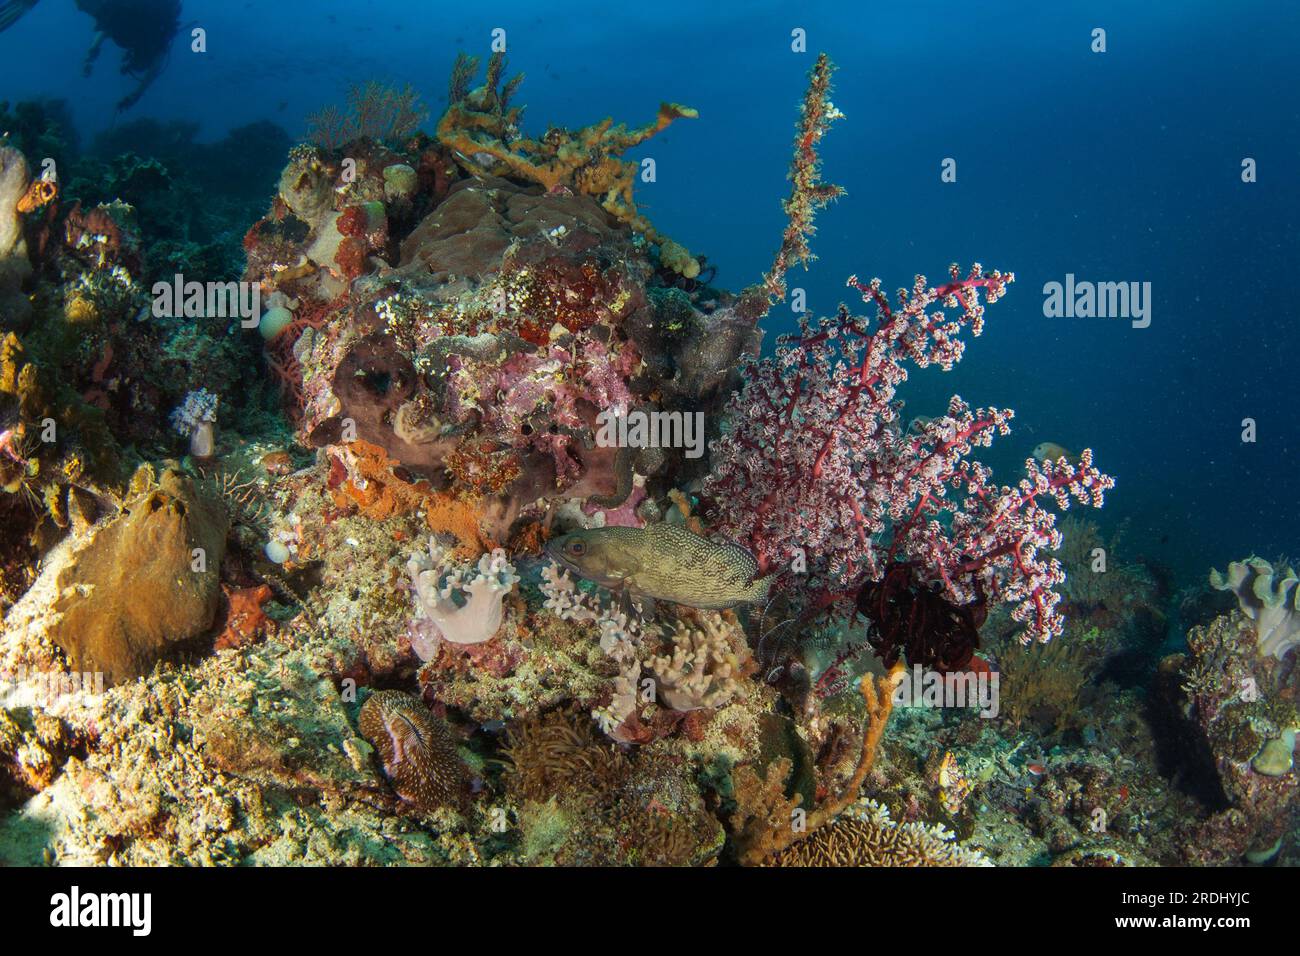 Epinephelus ongus near the seabed in Raja Ampat. Specklefin grouper during dive in Indonesia. Grouper is hiding under the corals. Stock Photo